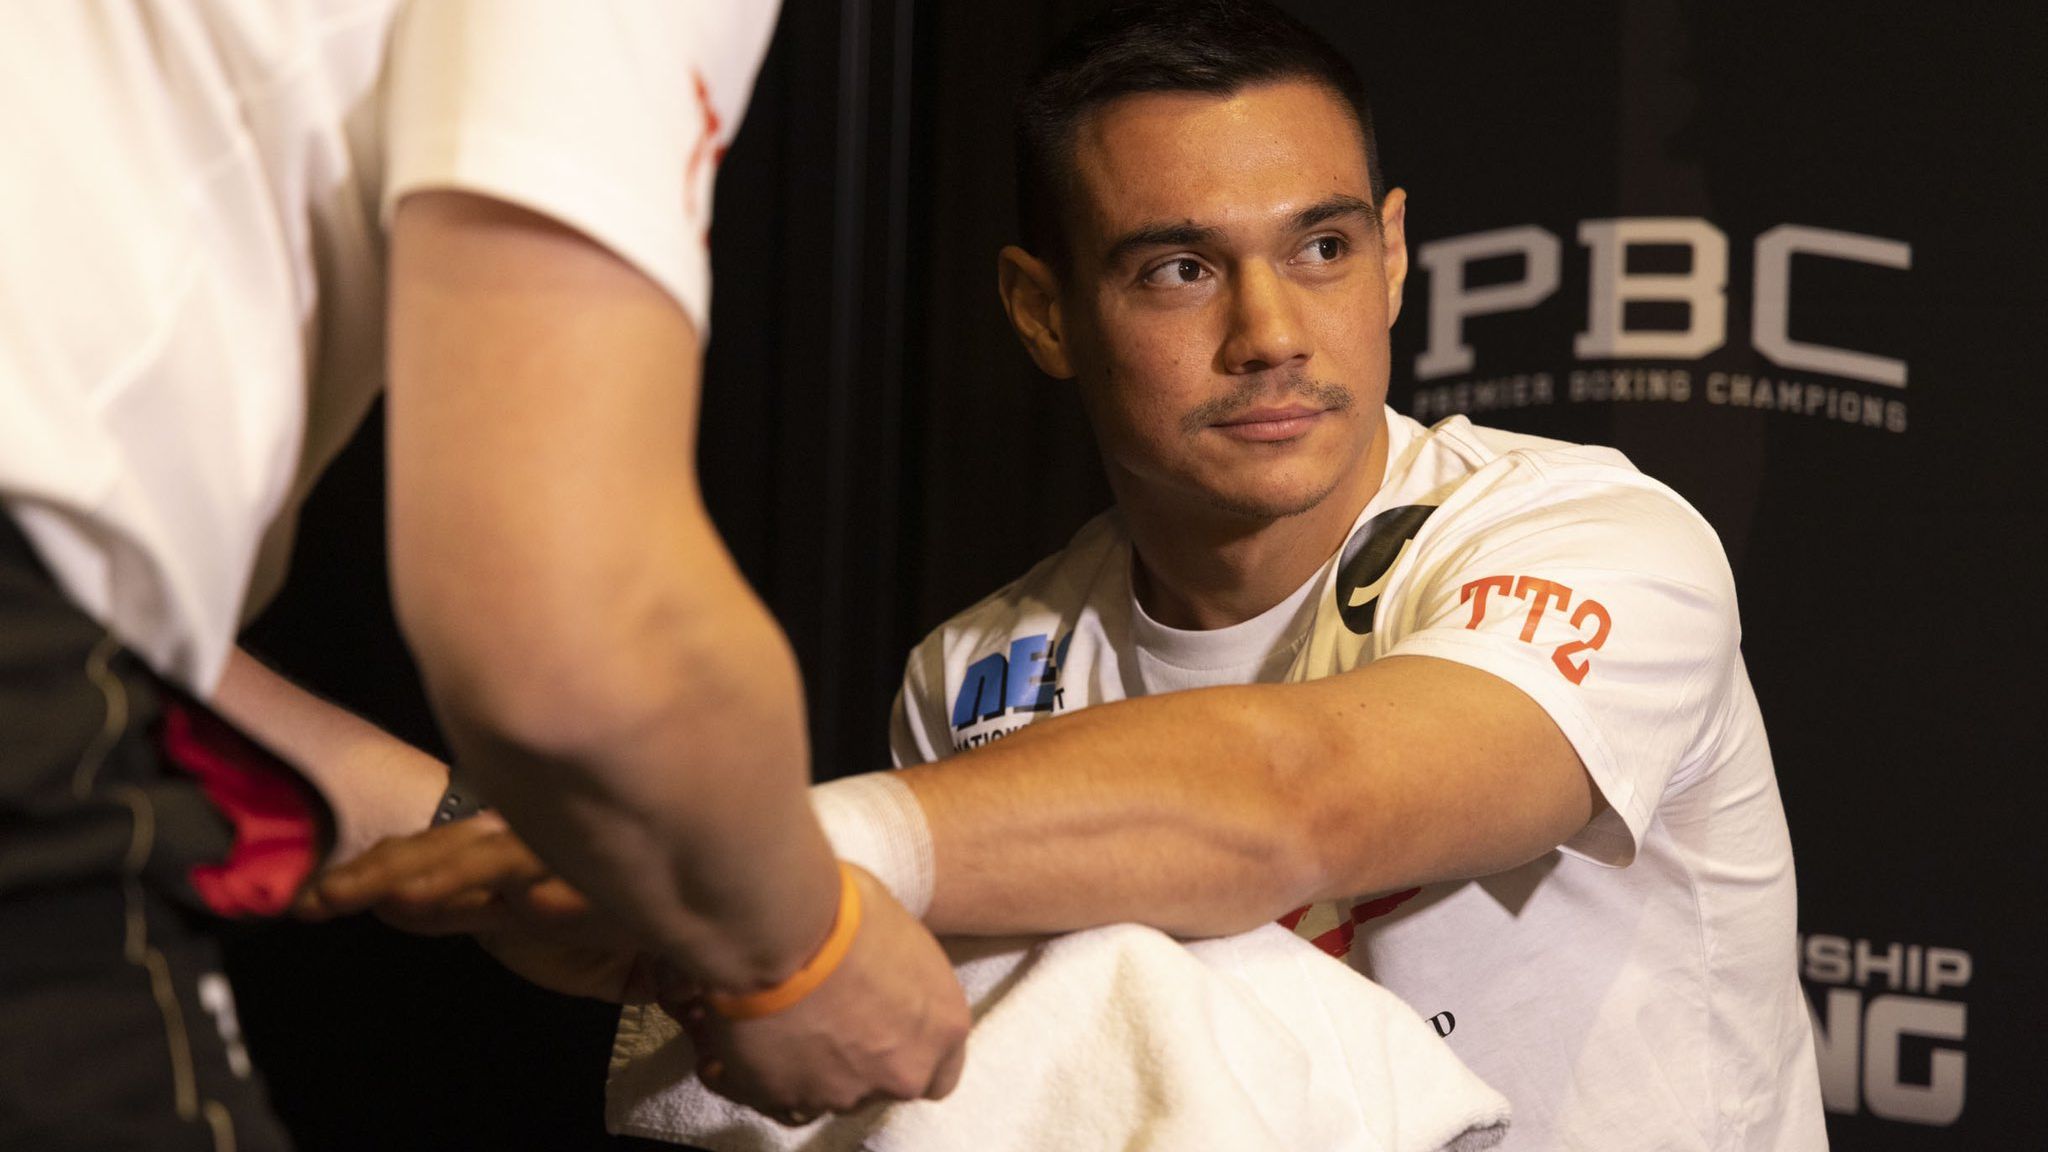 Tim Tszyu has his hands strapped before the fight.